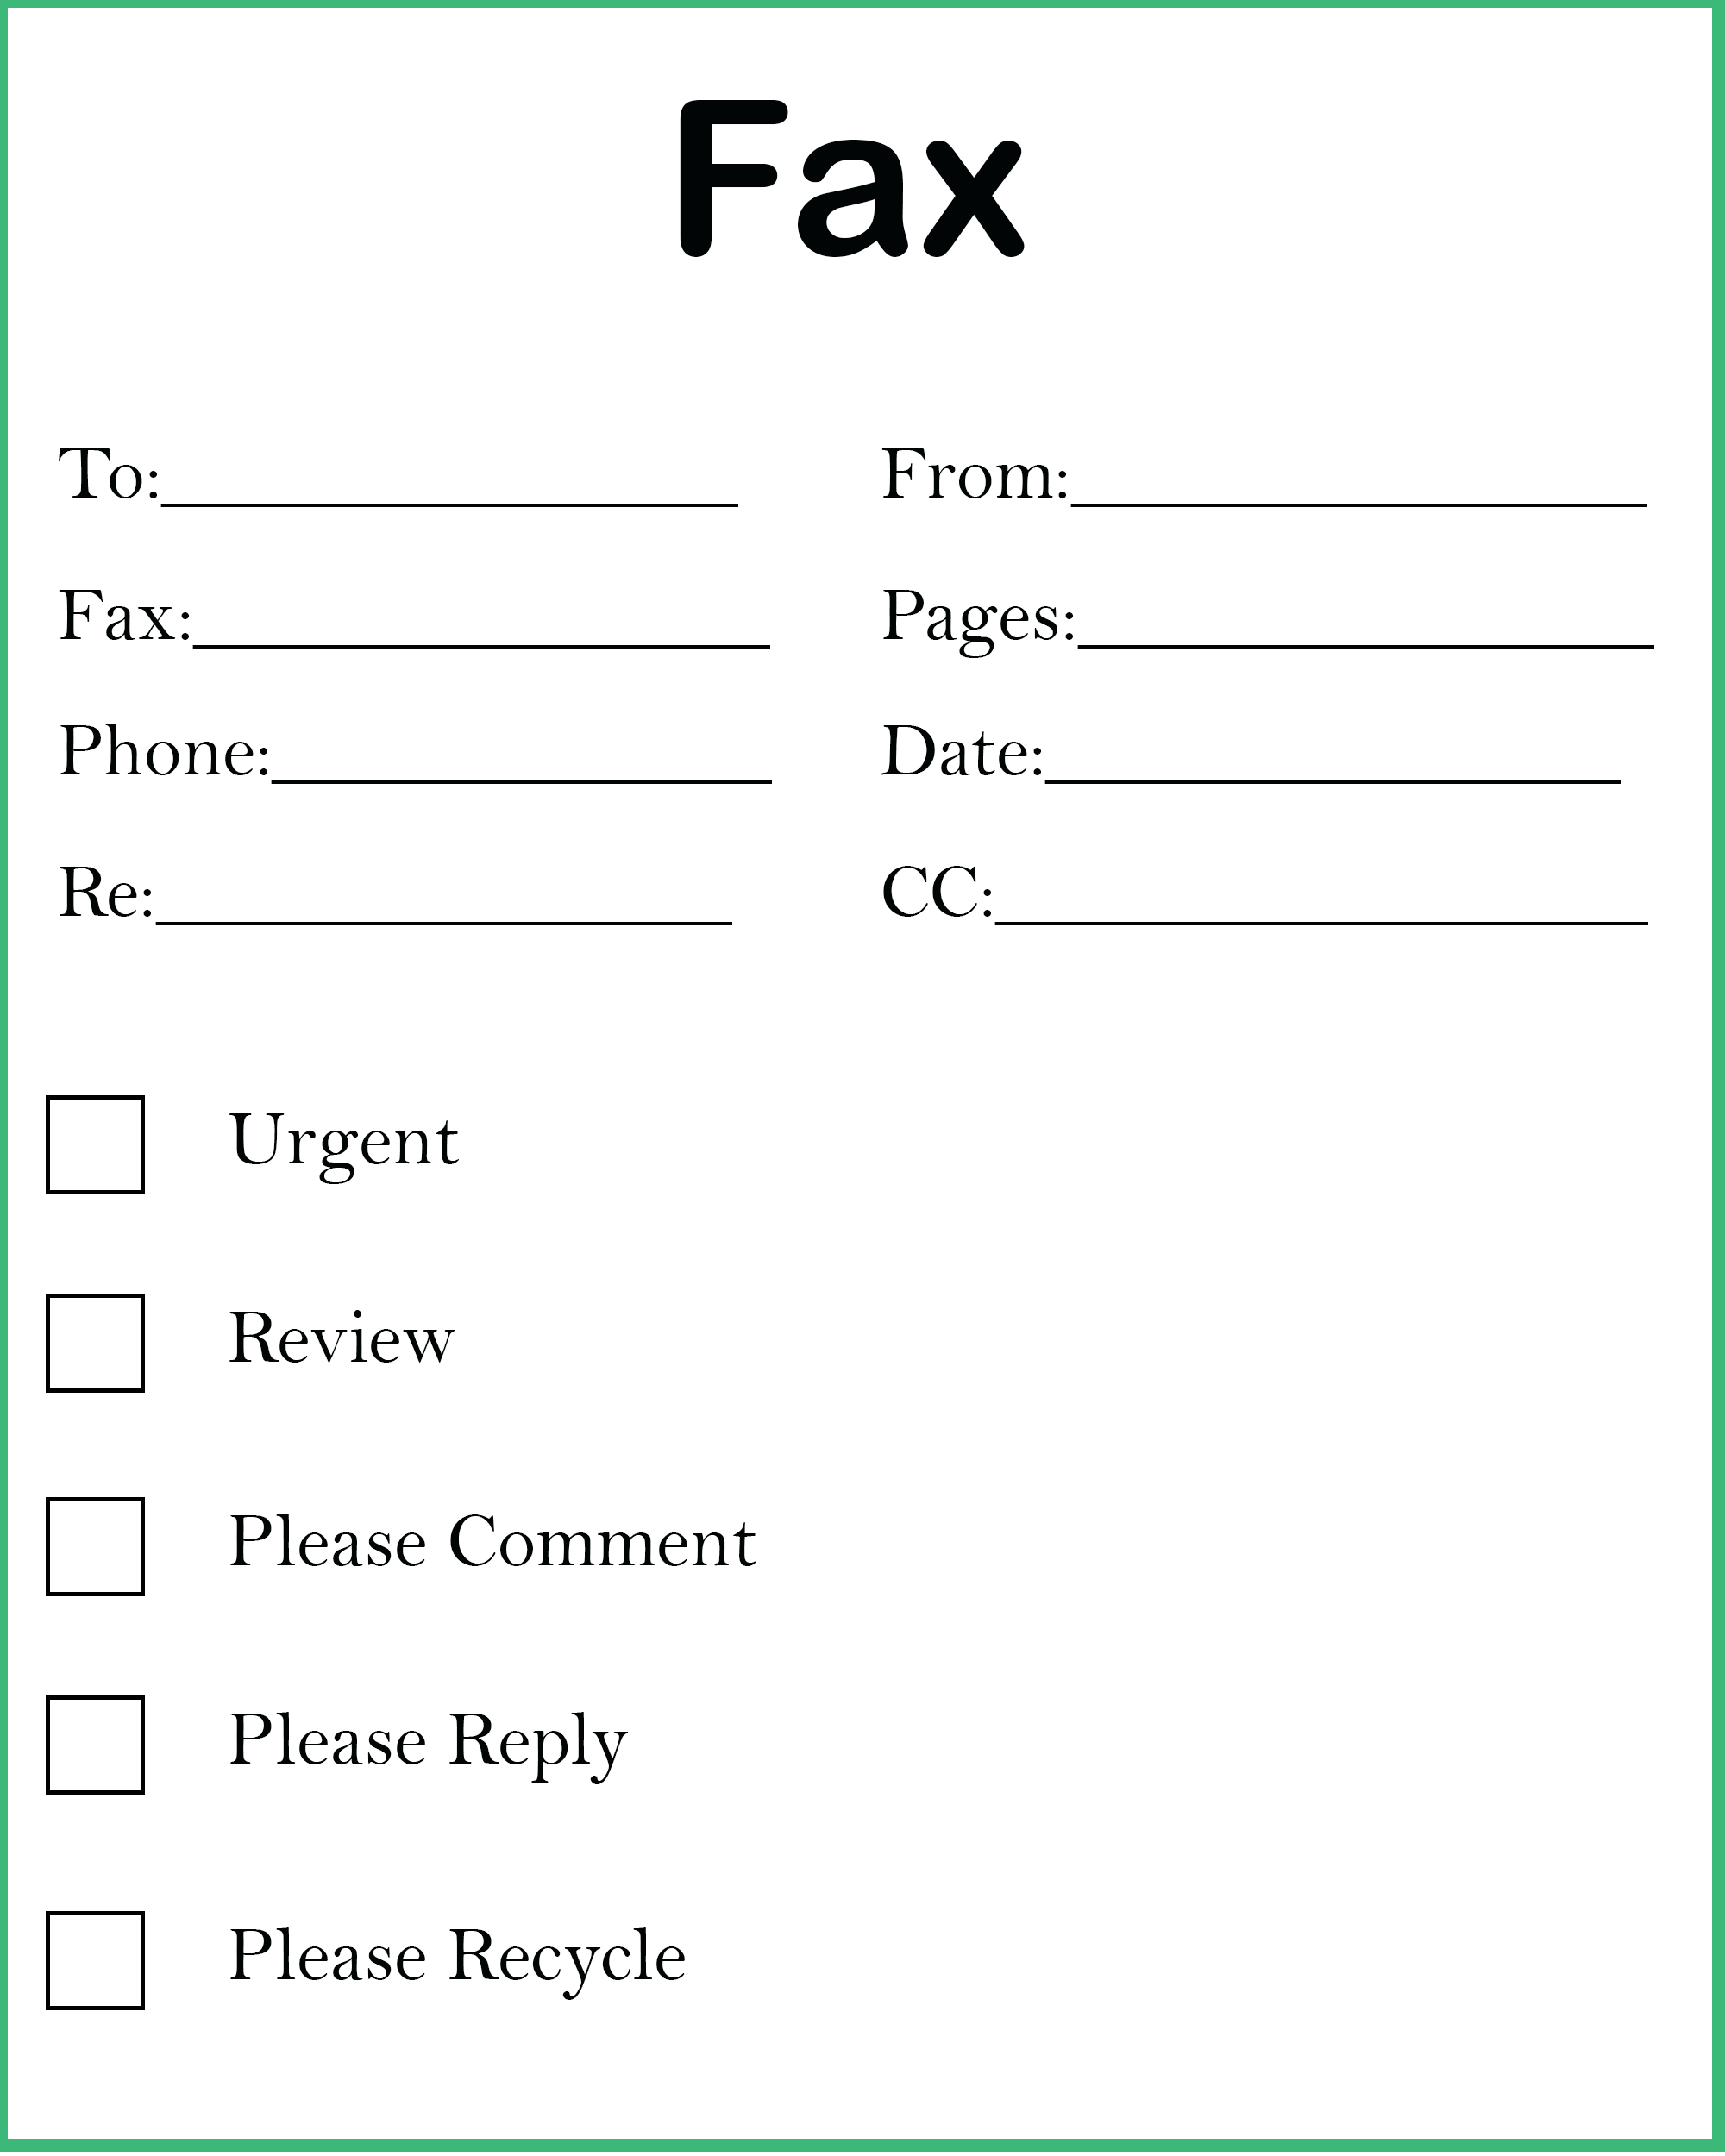 fax-cover-sheet-excel-fax-cover-sheet-template